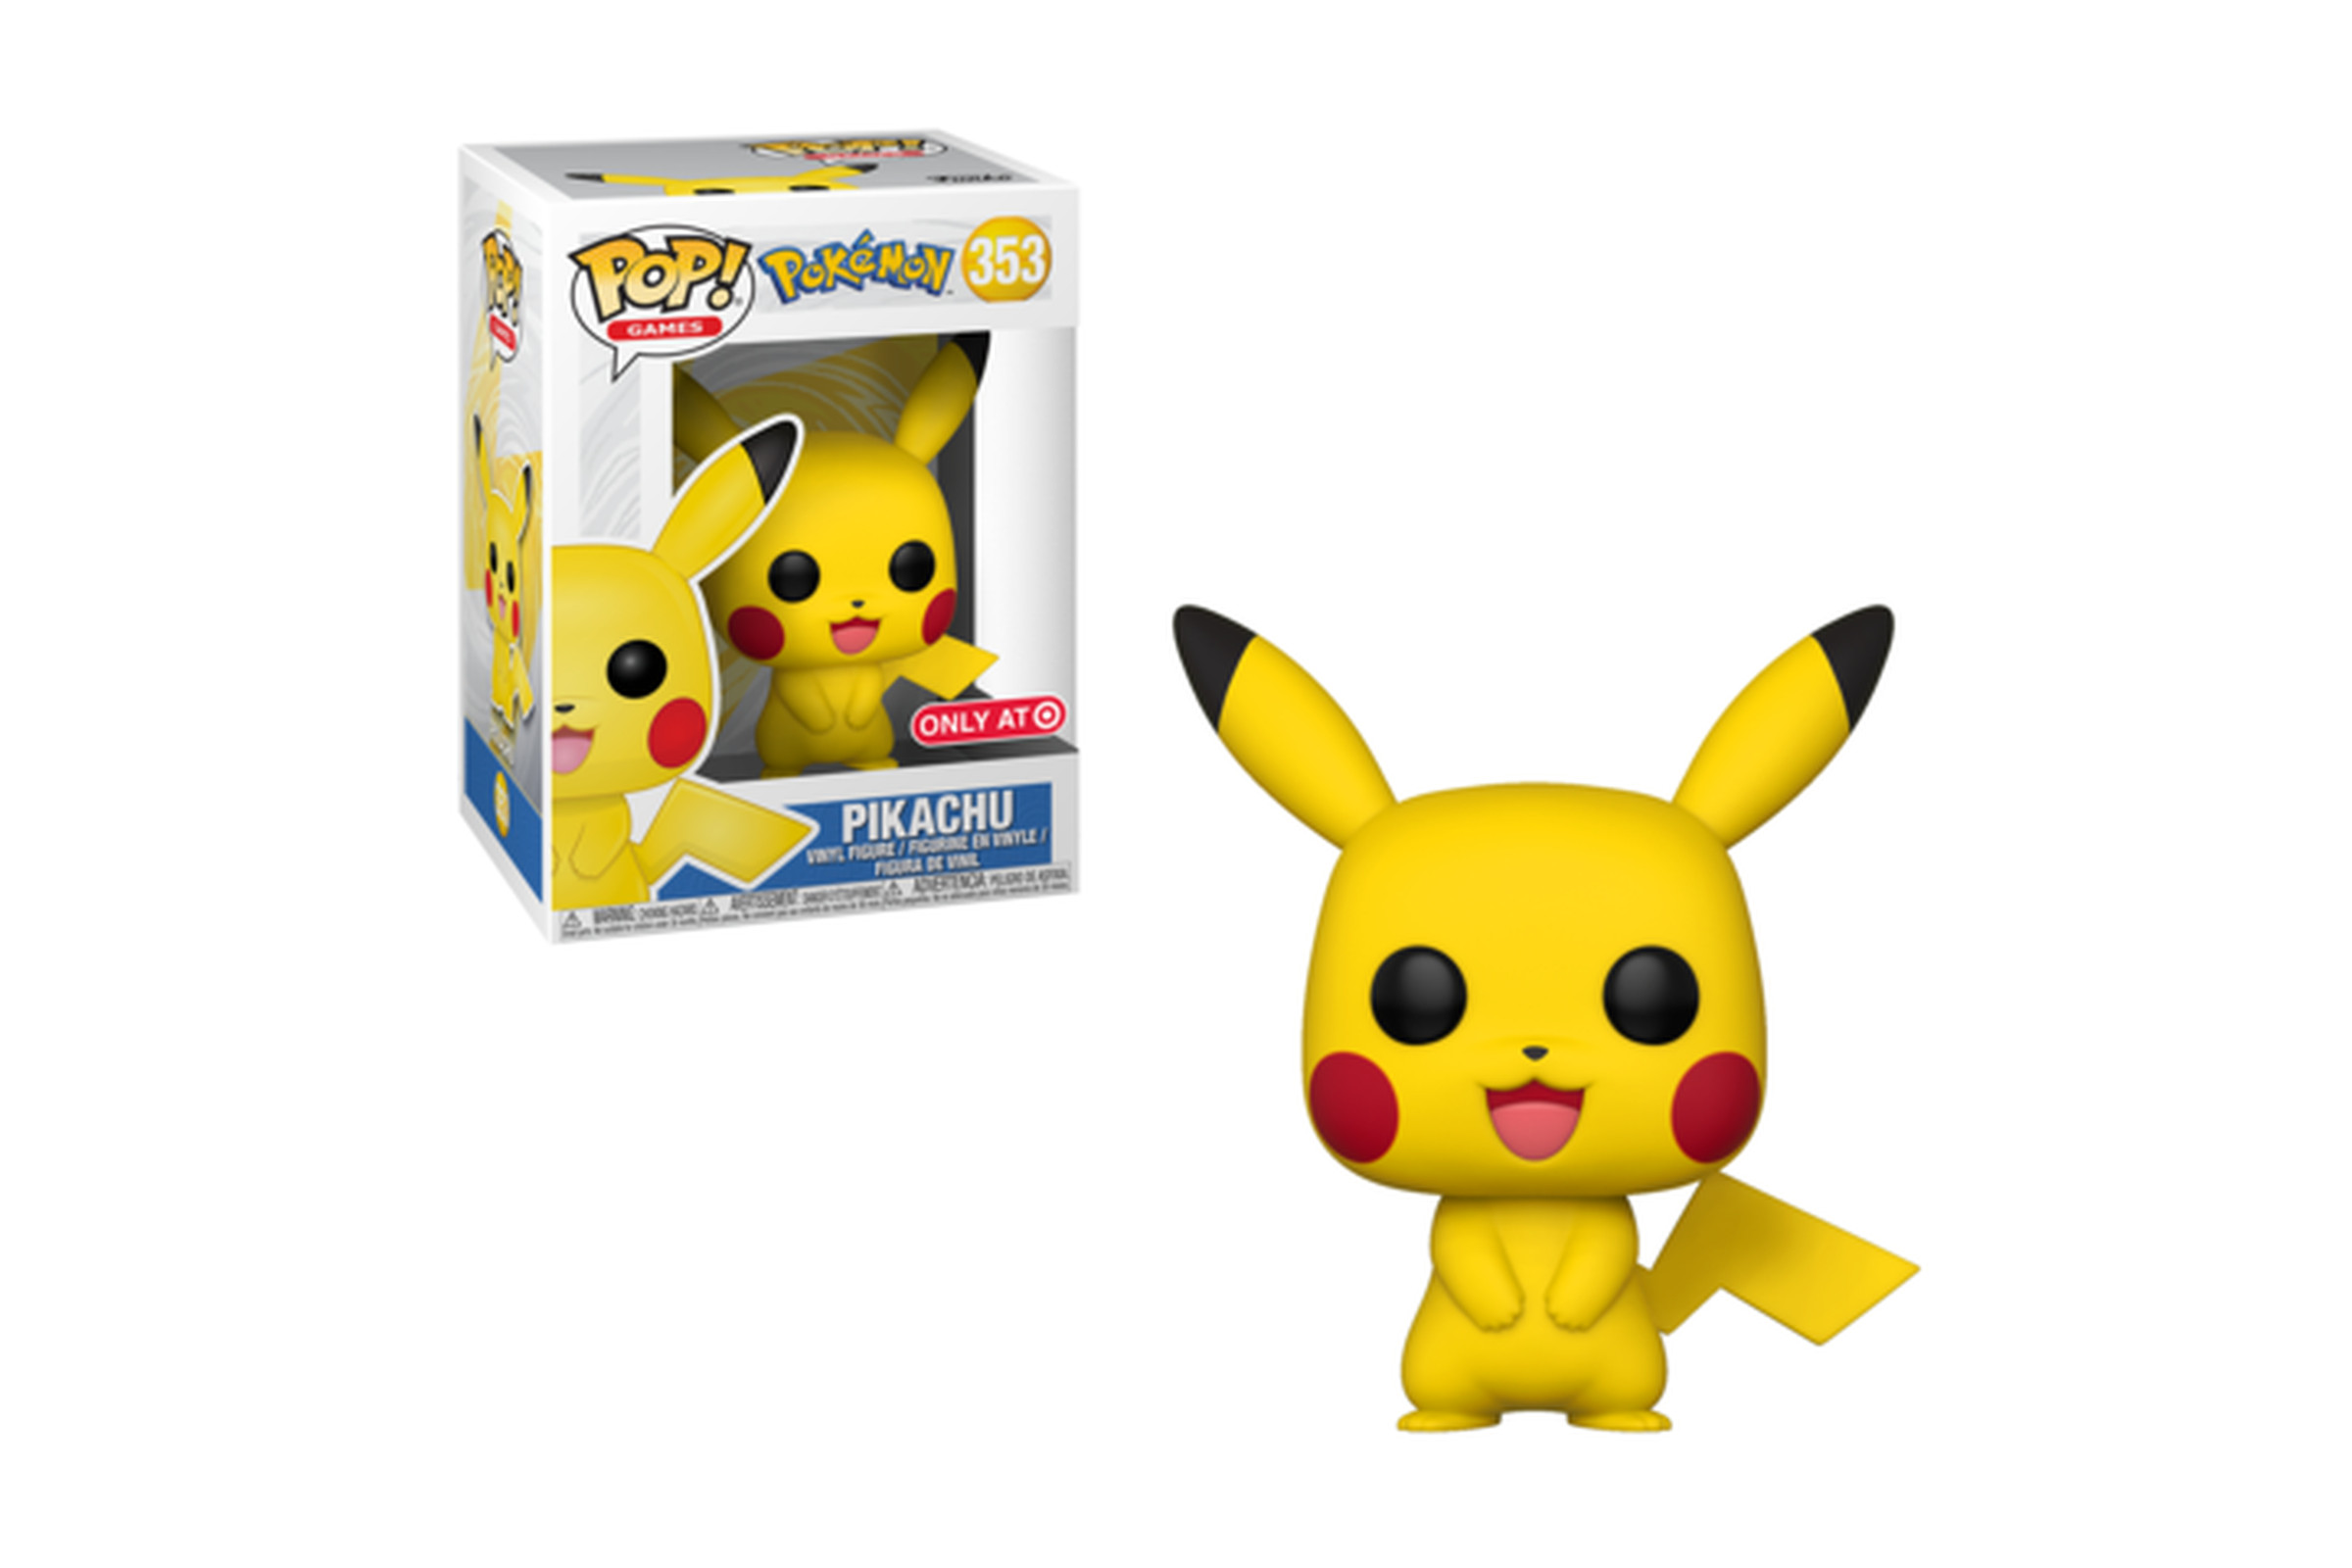 The Pikachu Funko Pop has no light in its eyes, and it's distressing - The  Verge